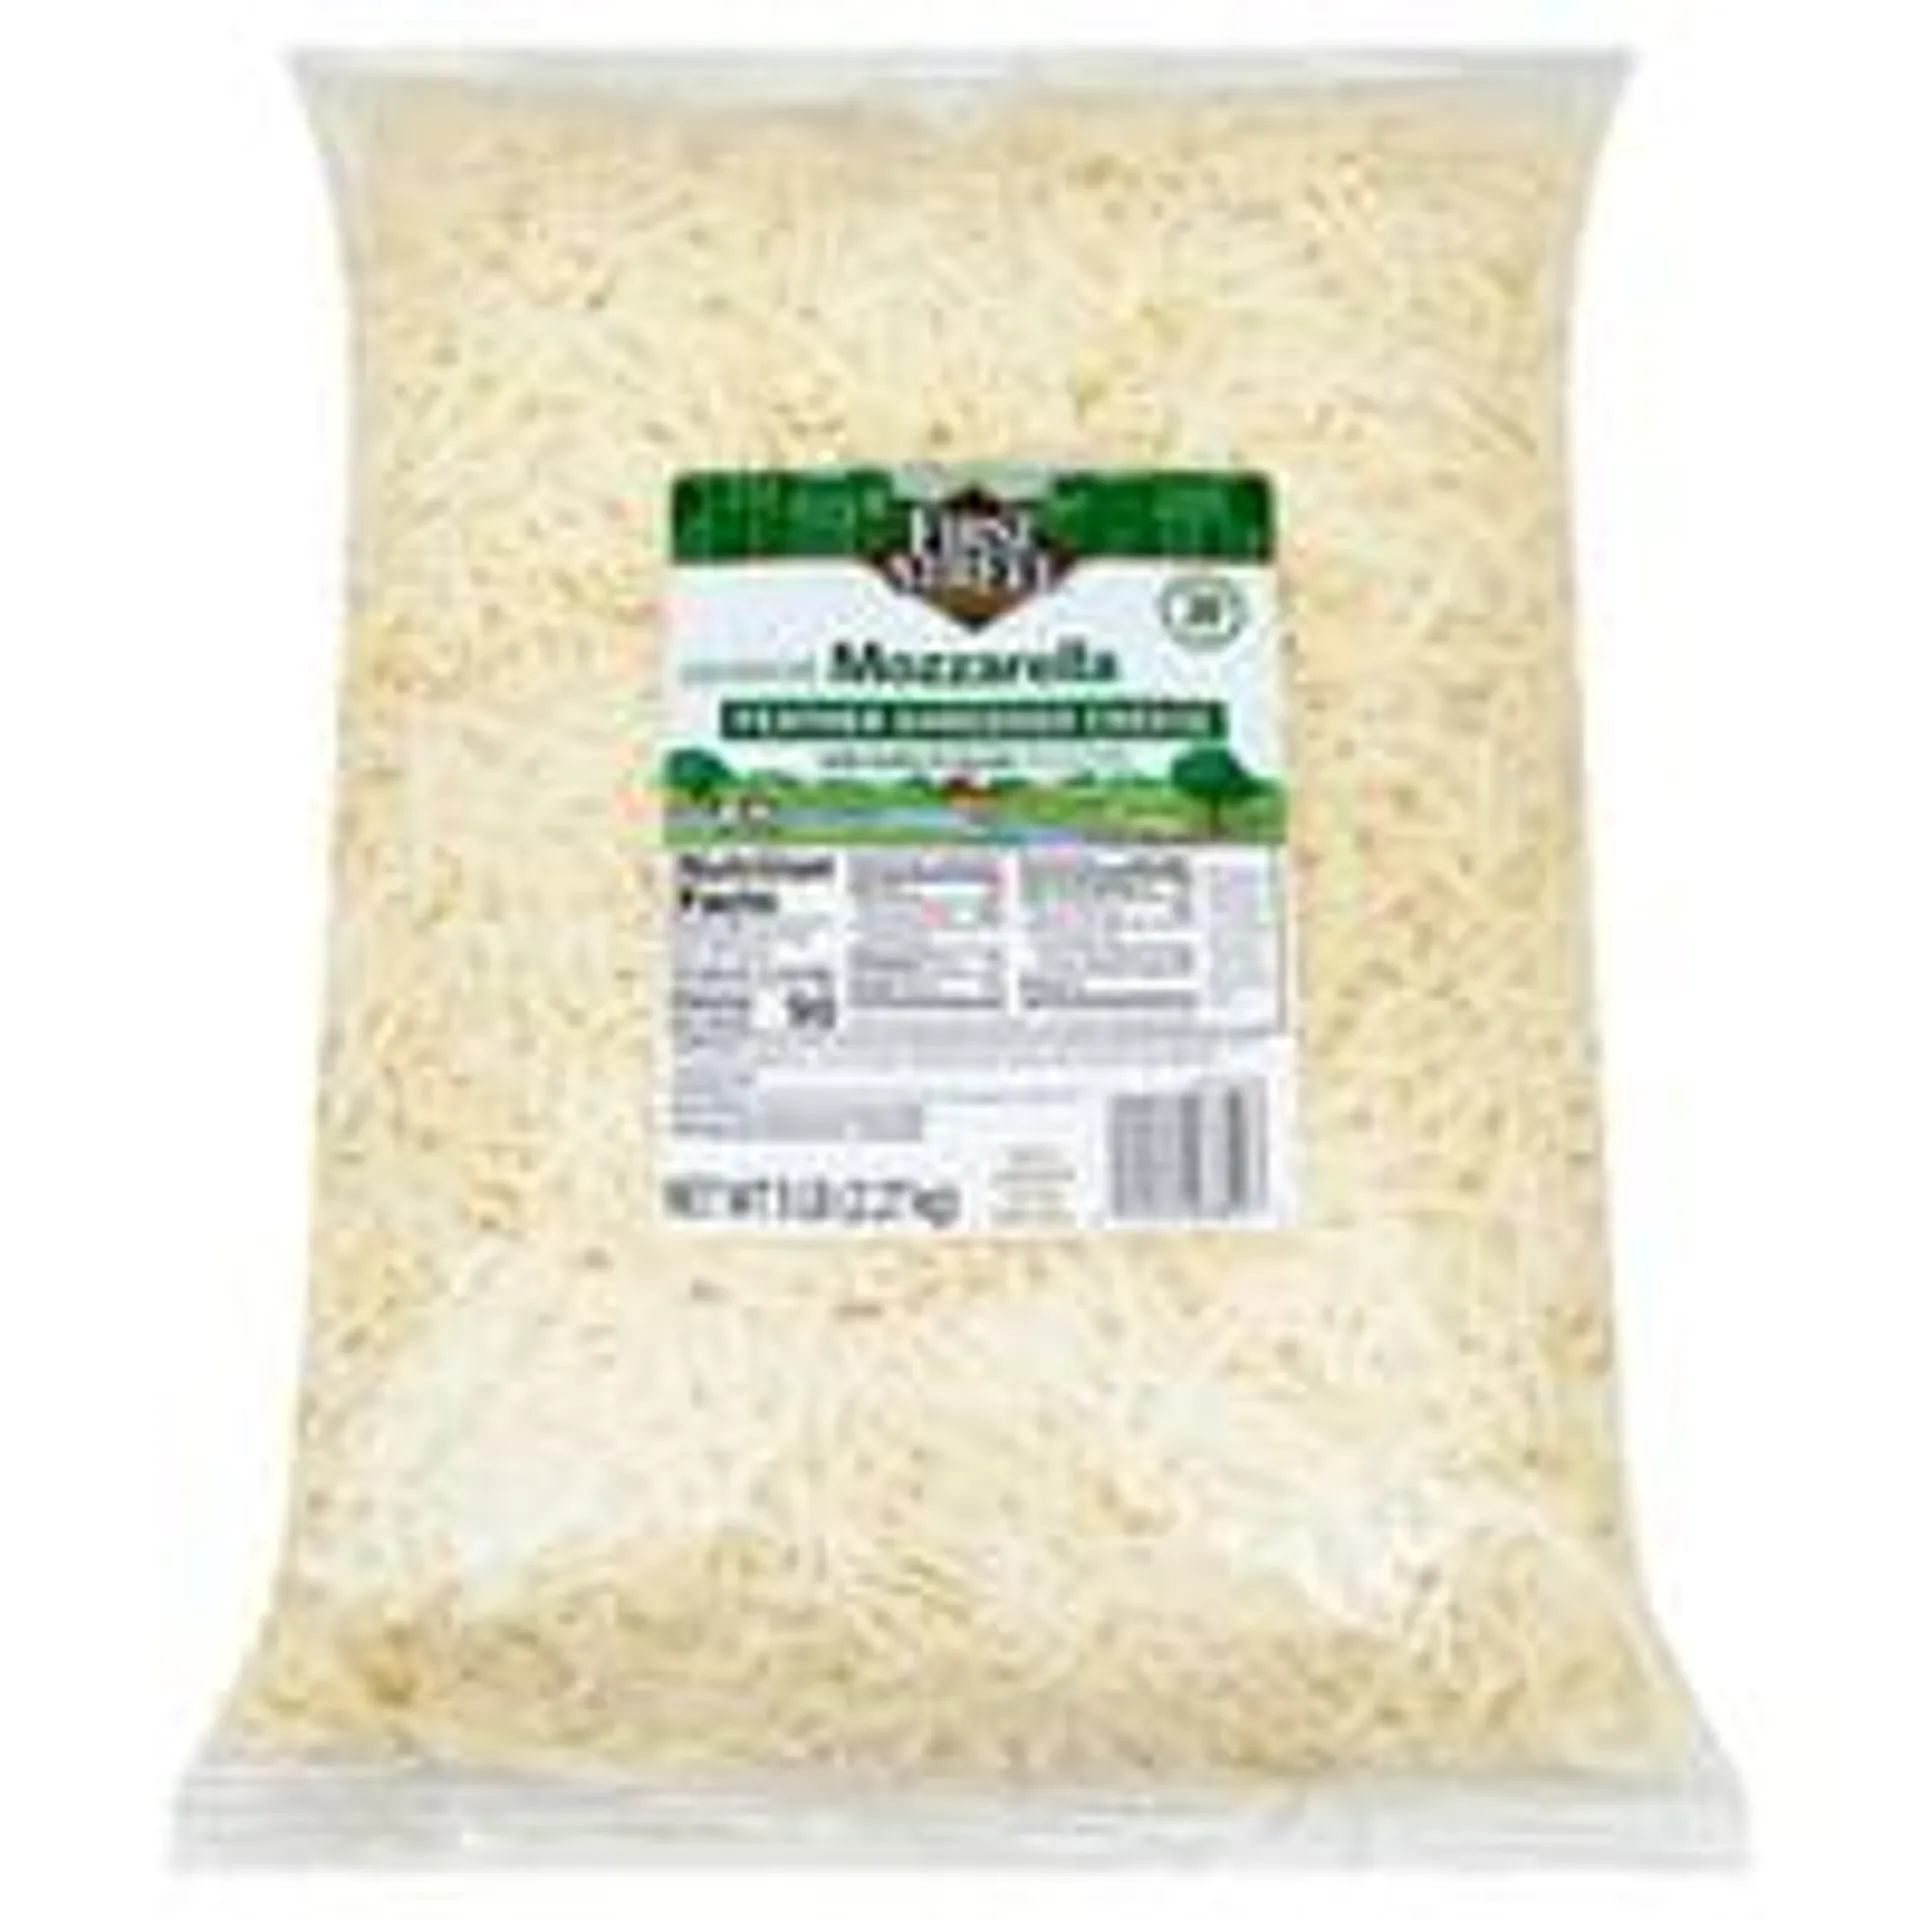 First Street Low-Moisture Mozzarella Feather Shredded Cheese